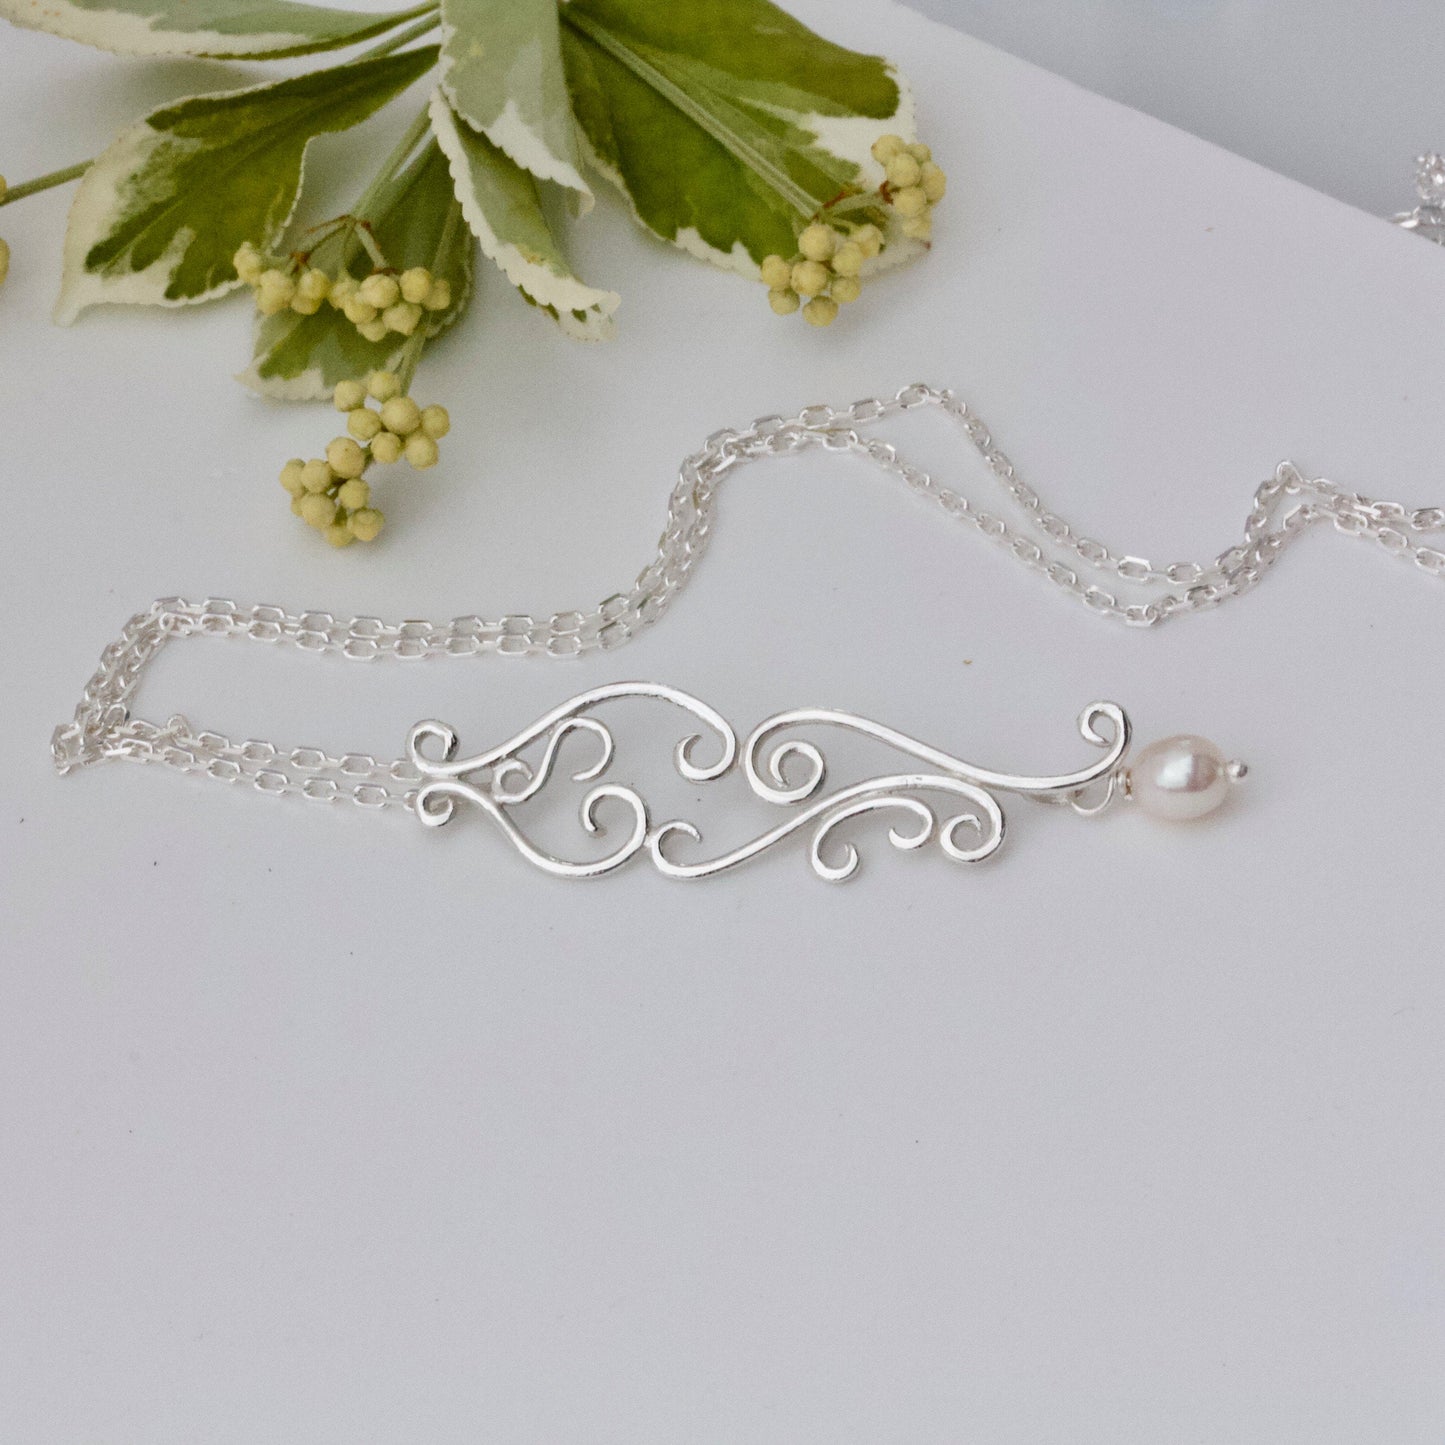 Vintage Style Romance Necklace, Silver and Pearl Brides Necklace